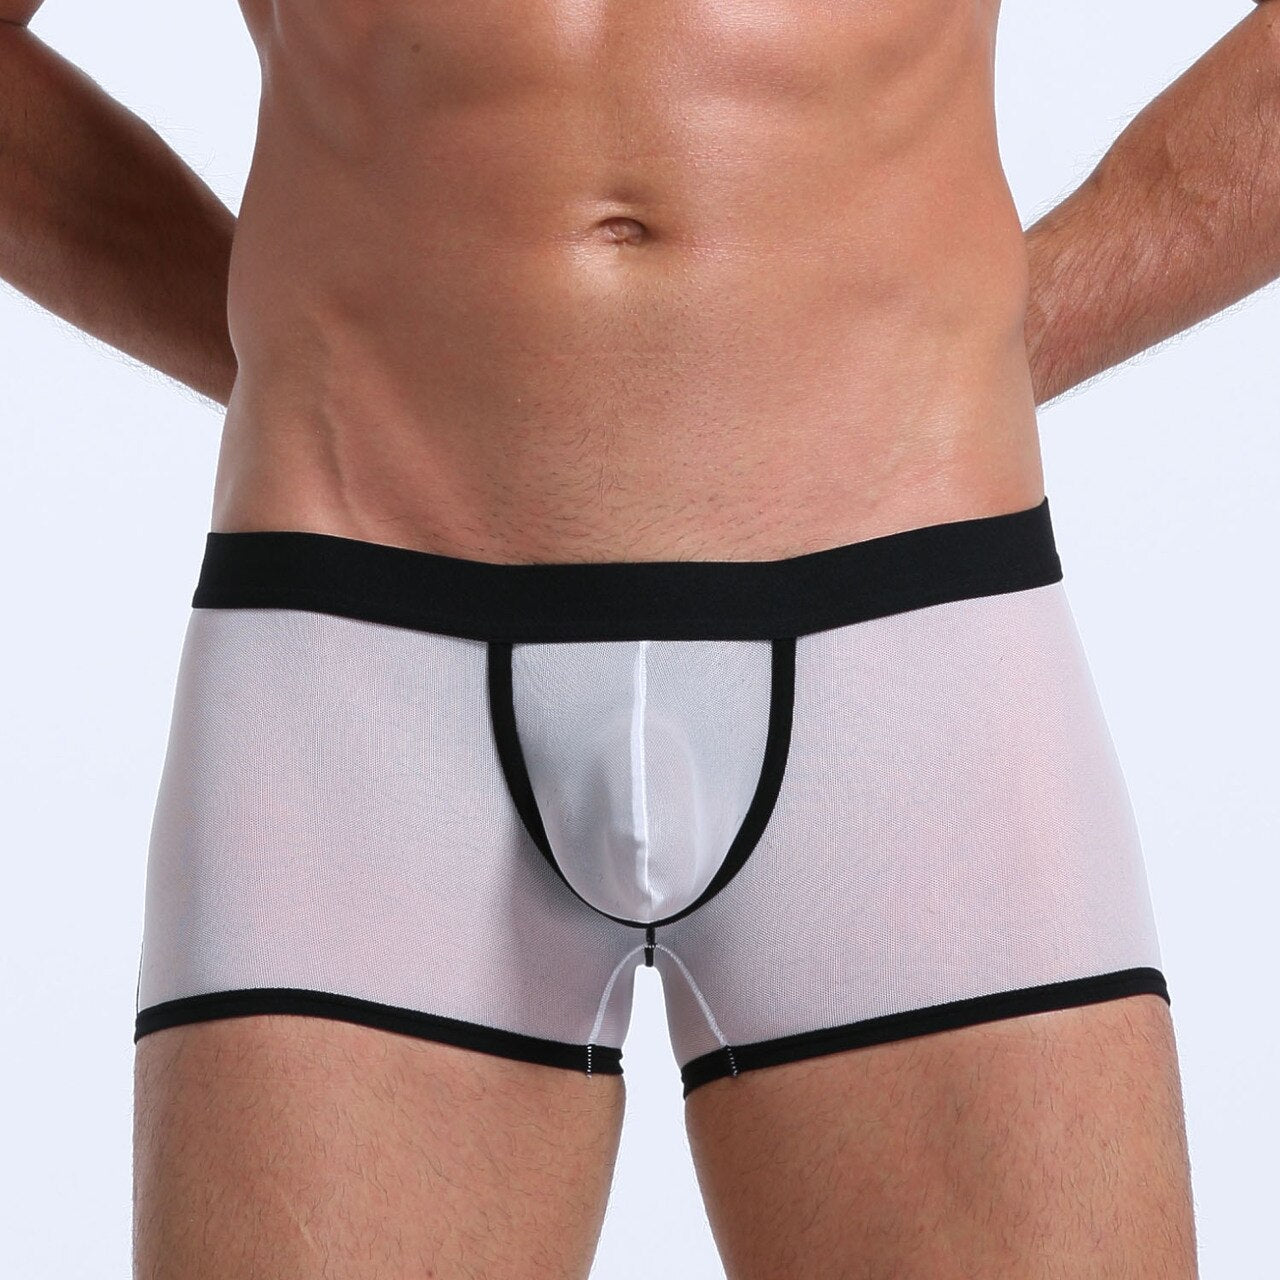 SALE - Mens Stretch Mesh Sheer Boxer Briefs with Pouch Front White